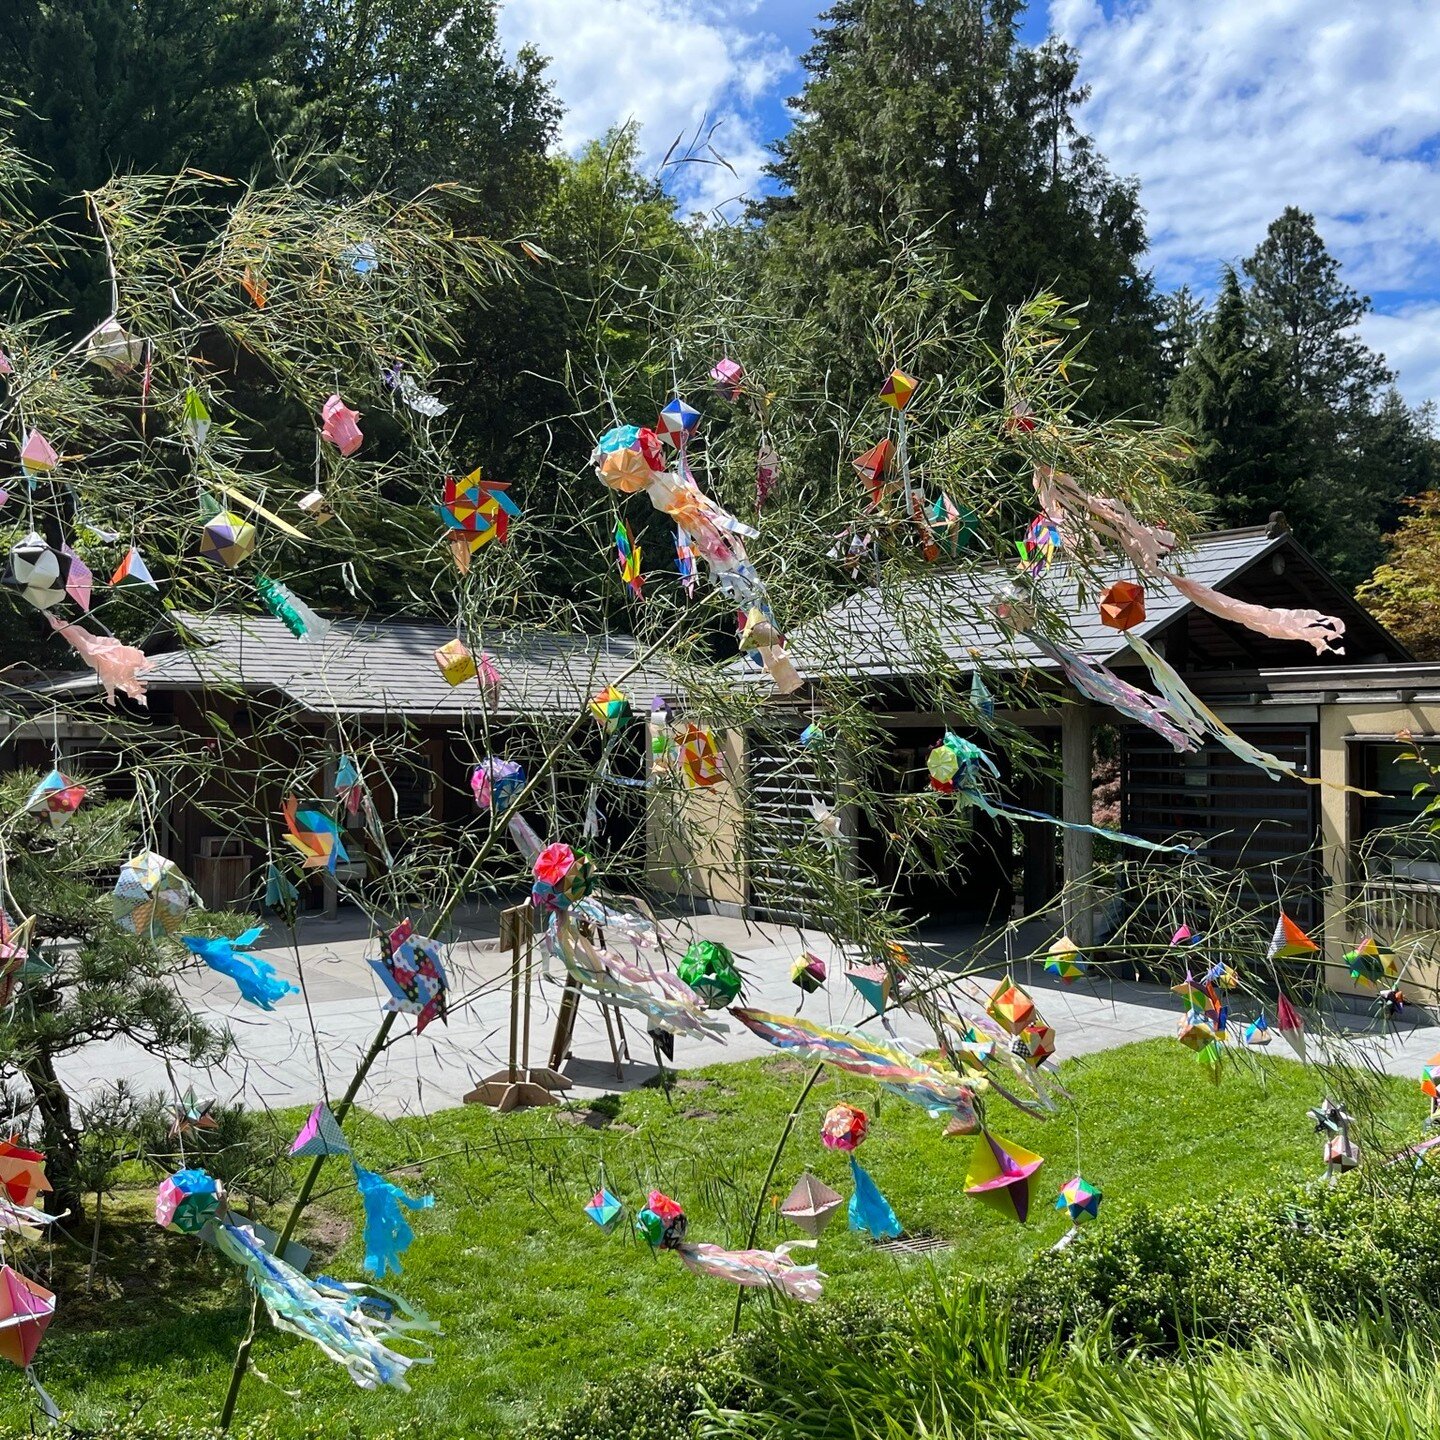 Thank you for everyone who made it to our 3-day Tanabata Star Festival! So many thoughtful wishes and beautiful origami were made during the event.

We also appreciate all the event volunteers, origami volunteers from P.A.P.E.R. and a wonderful perfo